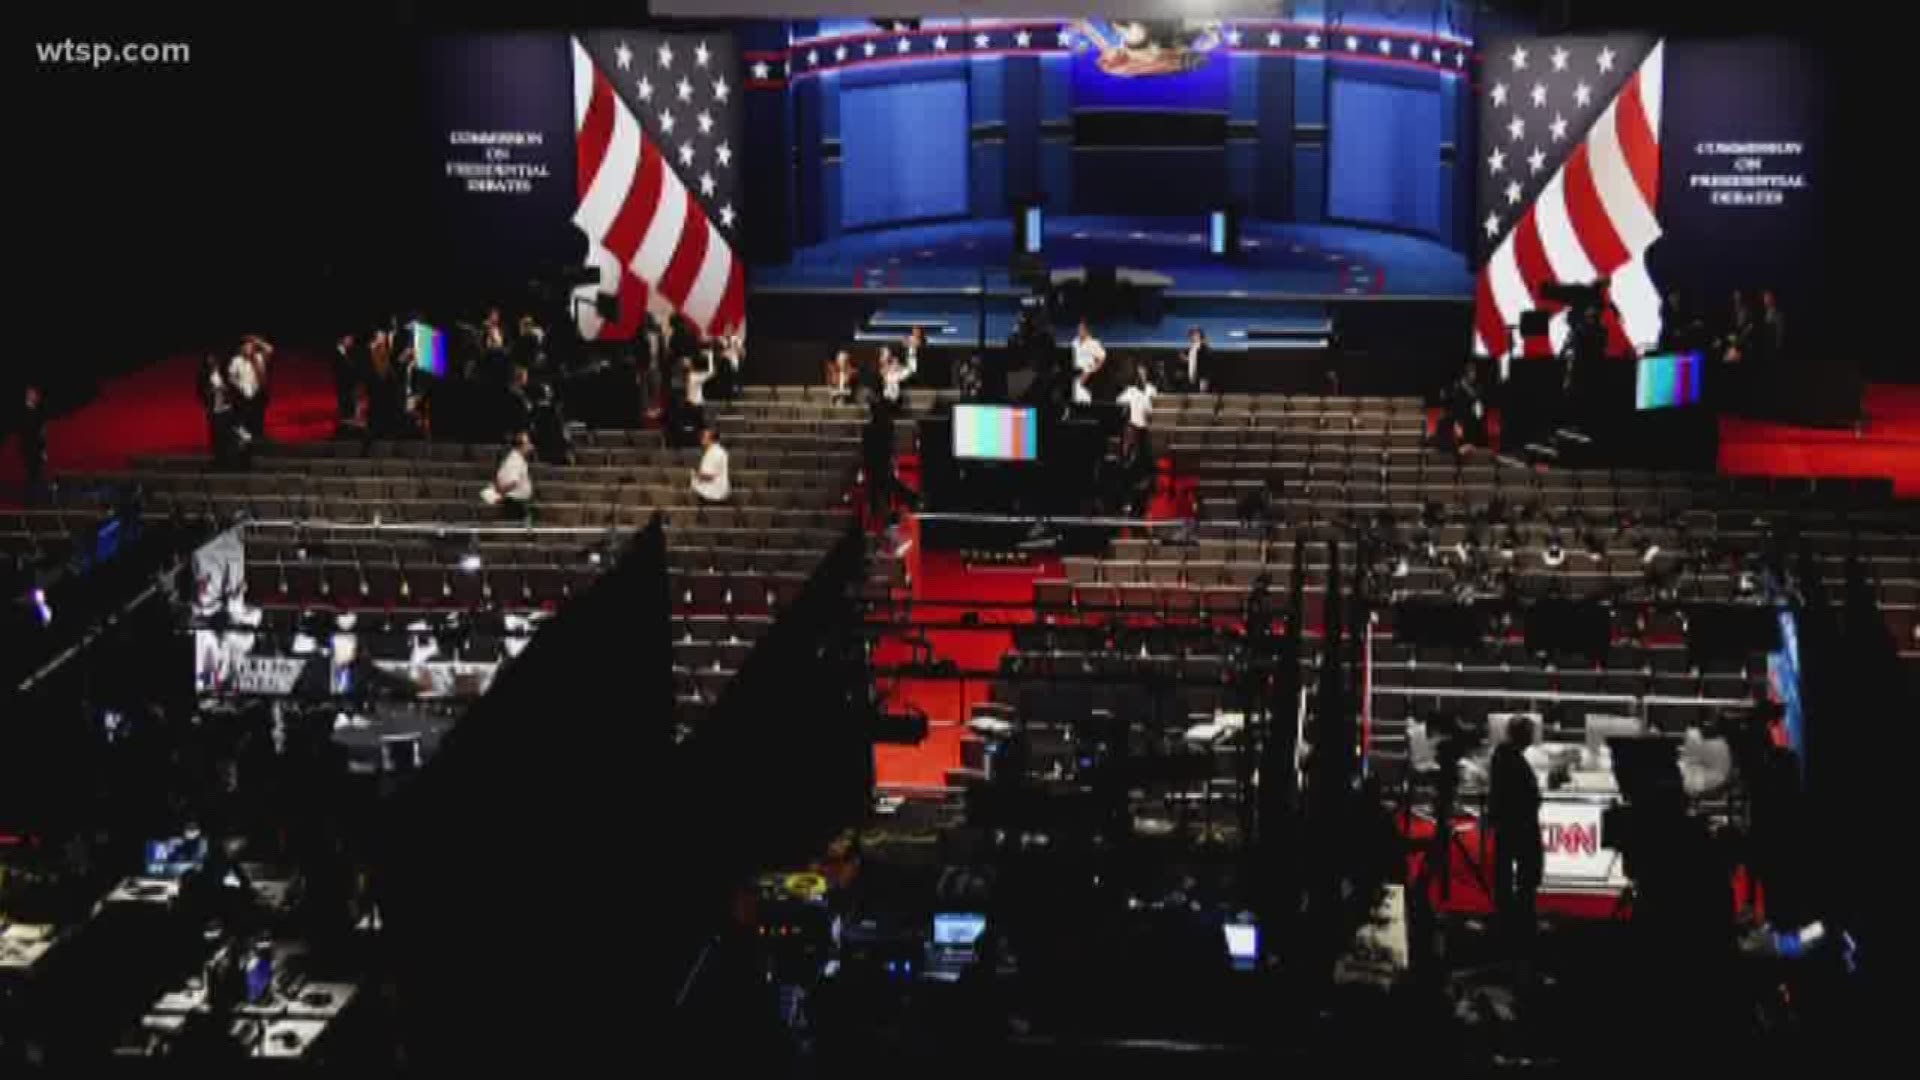 Twenty Democratic presidential candidates will debate between Wednesday and Thursday nights. https://on.wtsp.com/31XH3TE